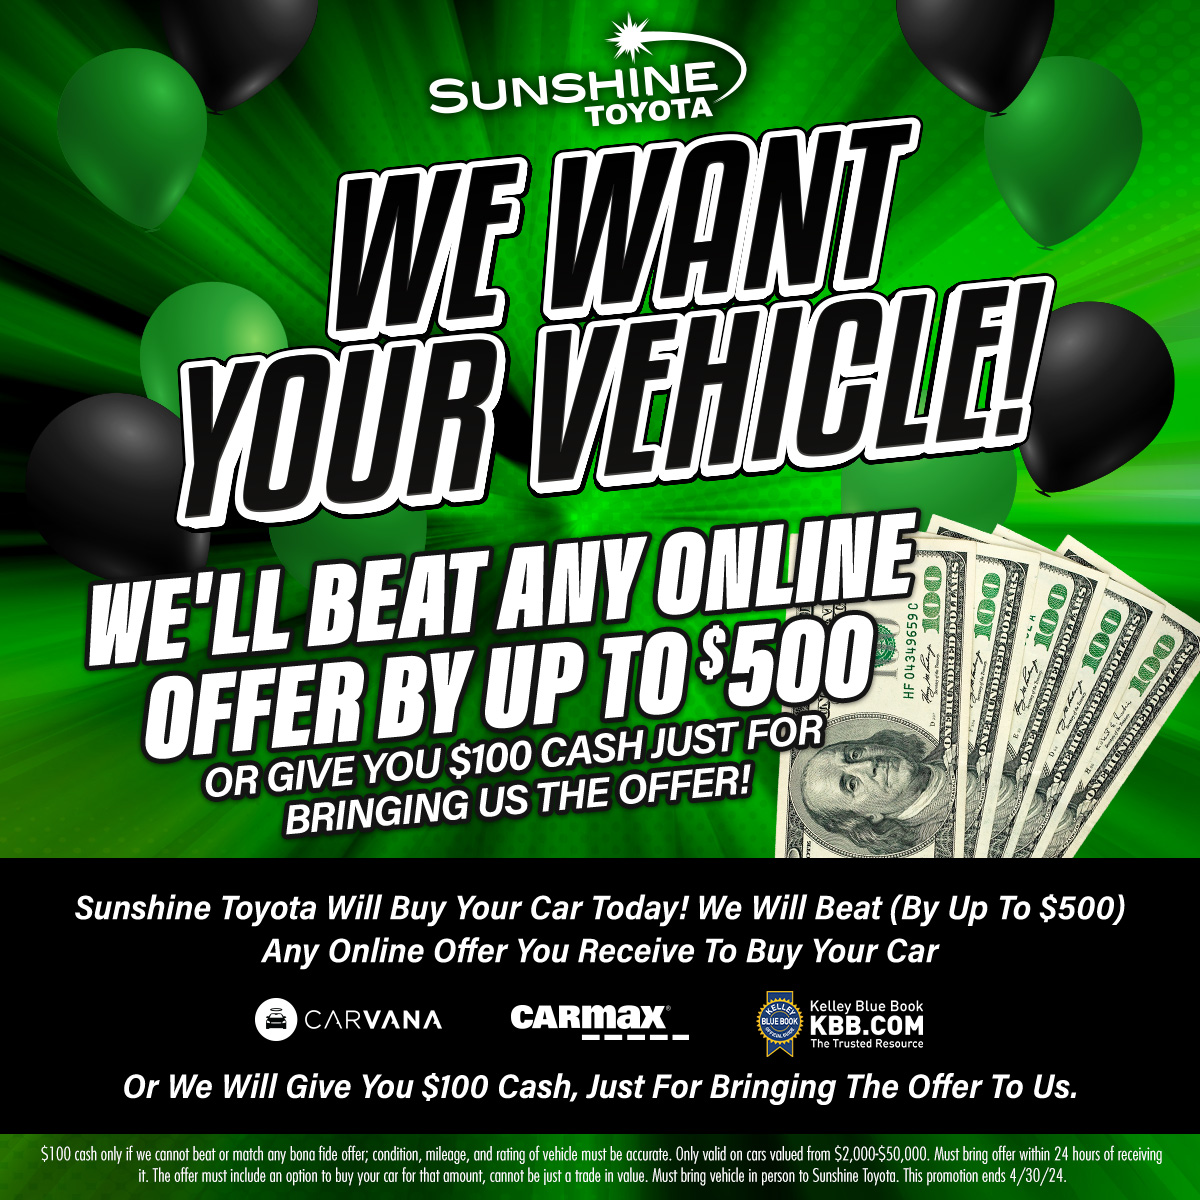 Sunshine Toyota will buy your car today! We will beat any online offer you receive to buy your car - OR we will give you $100 CASH, just for bringing the offer to us! #sunshinetoyota #usedcarsforsale